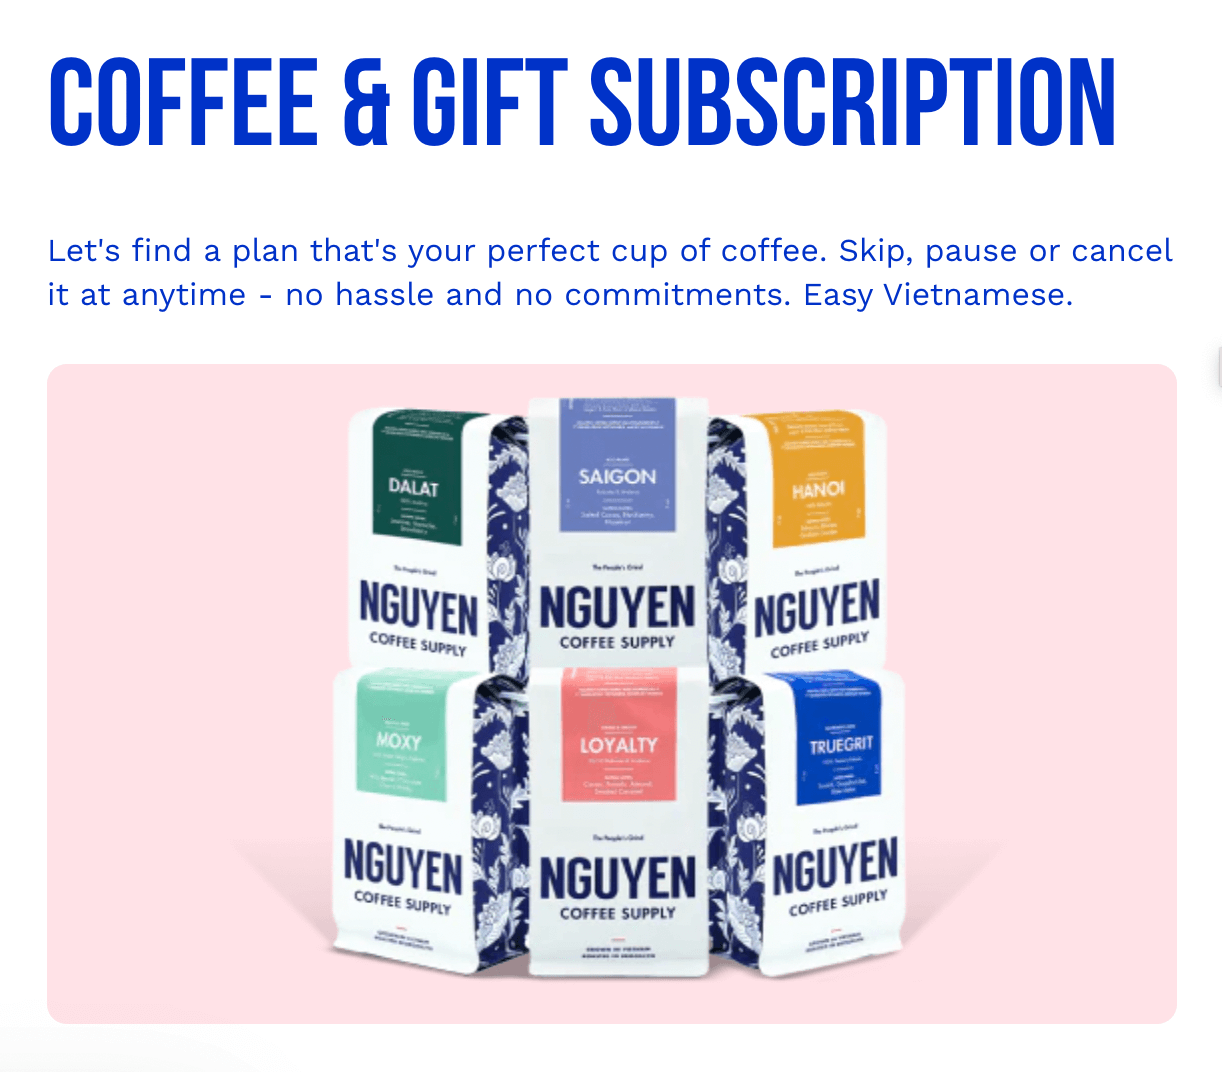 Nguyen Coffee Supply makes it easy to subscribe